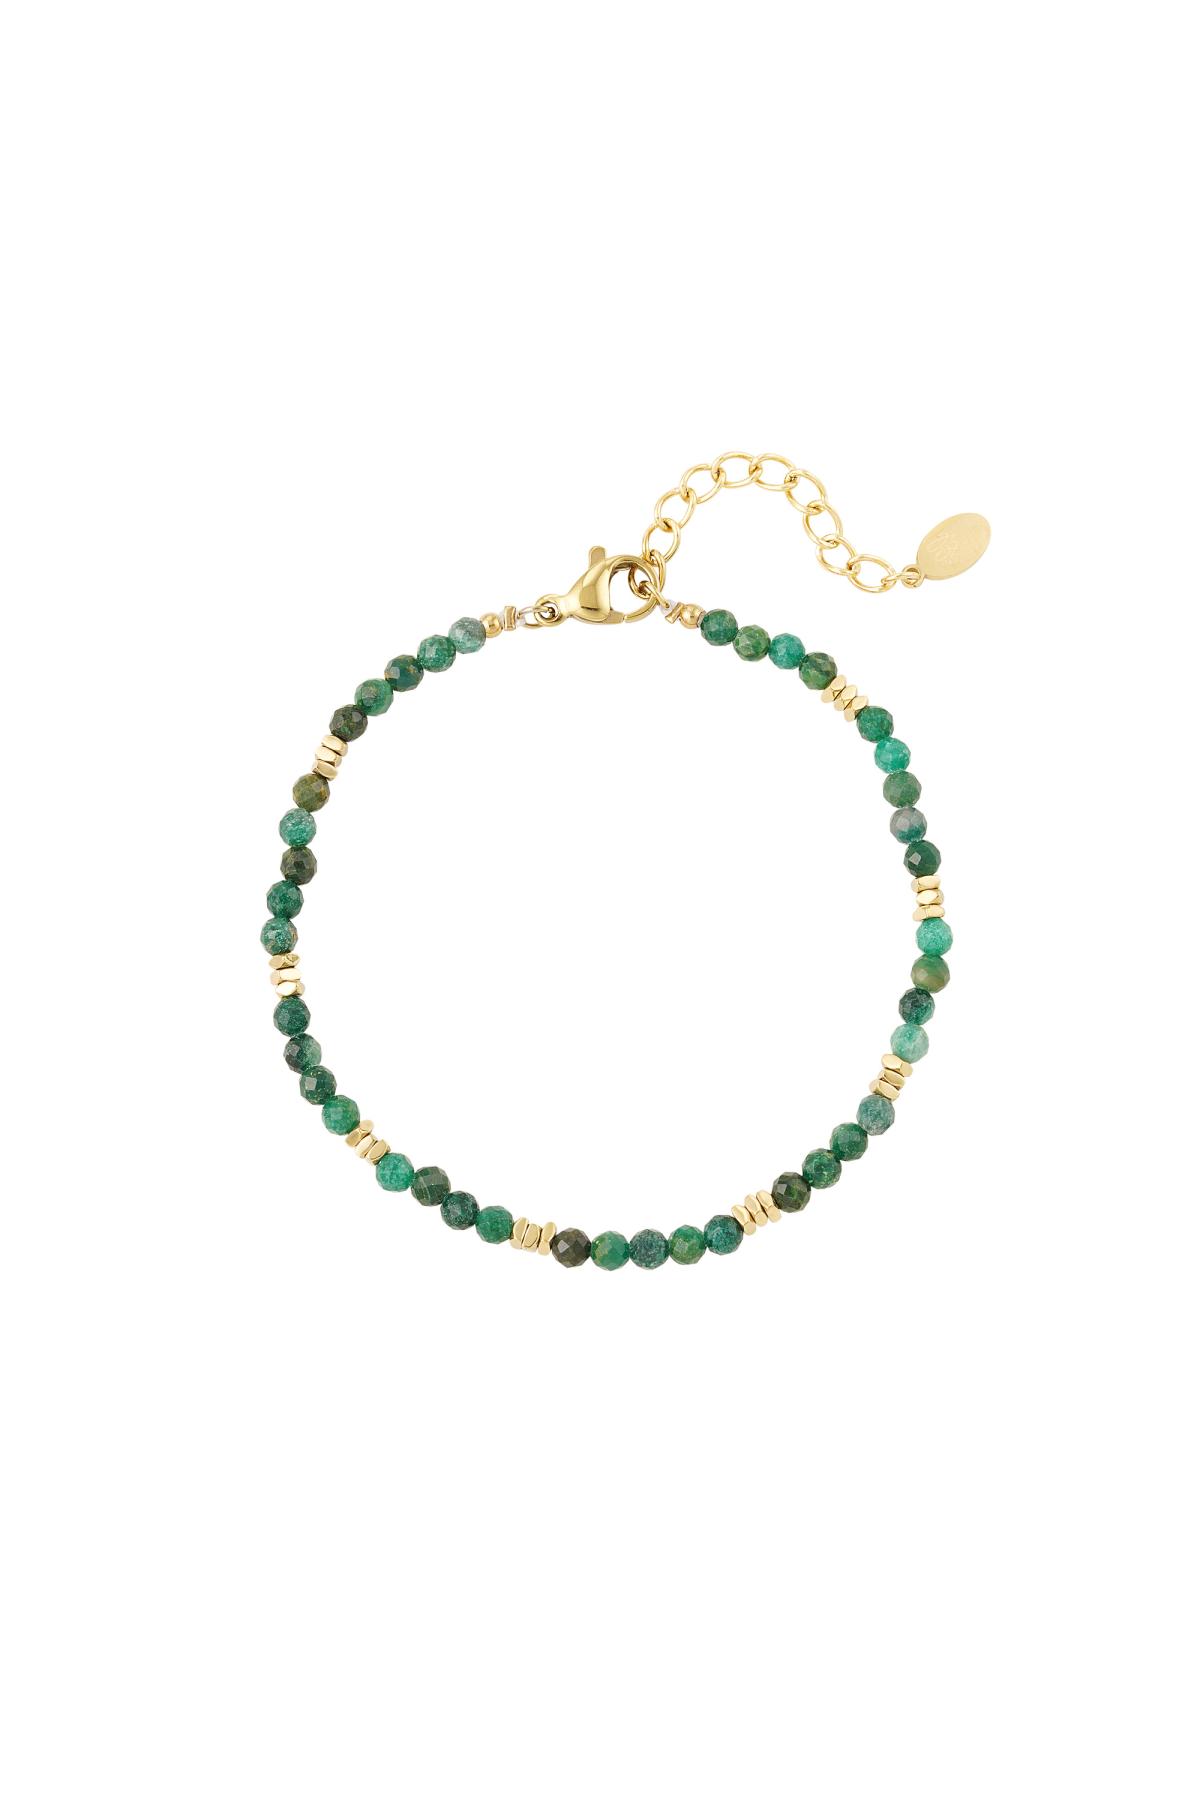 Bracelet colored beads - Natural stones collection Green &amp; Gold Stainless Steel